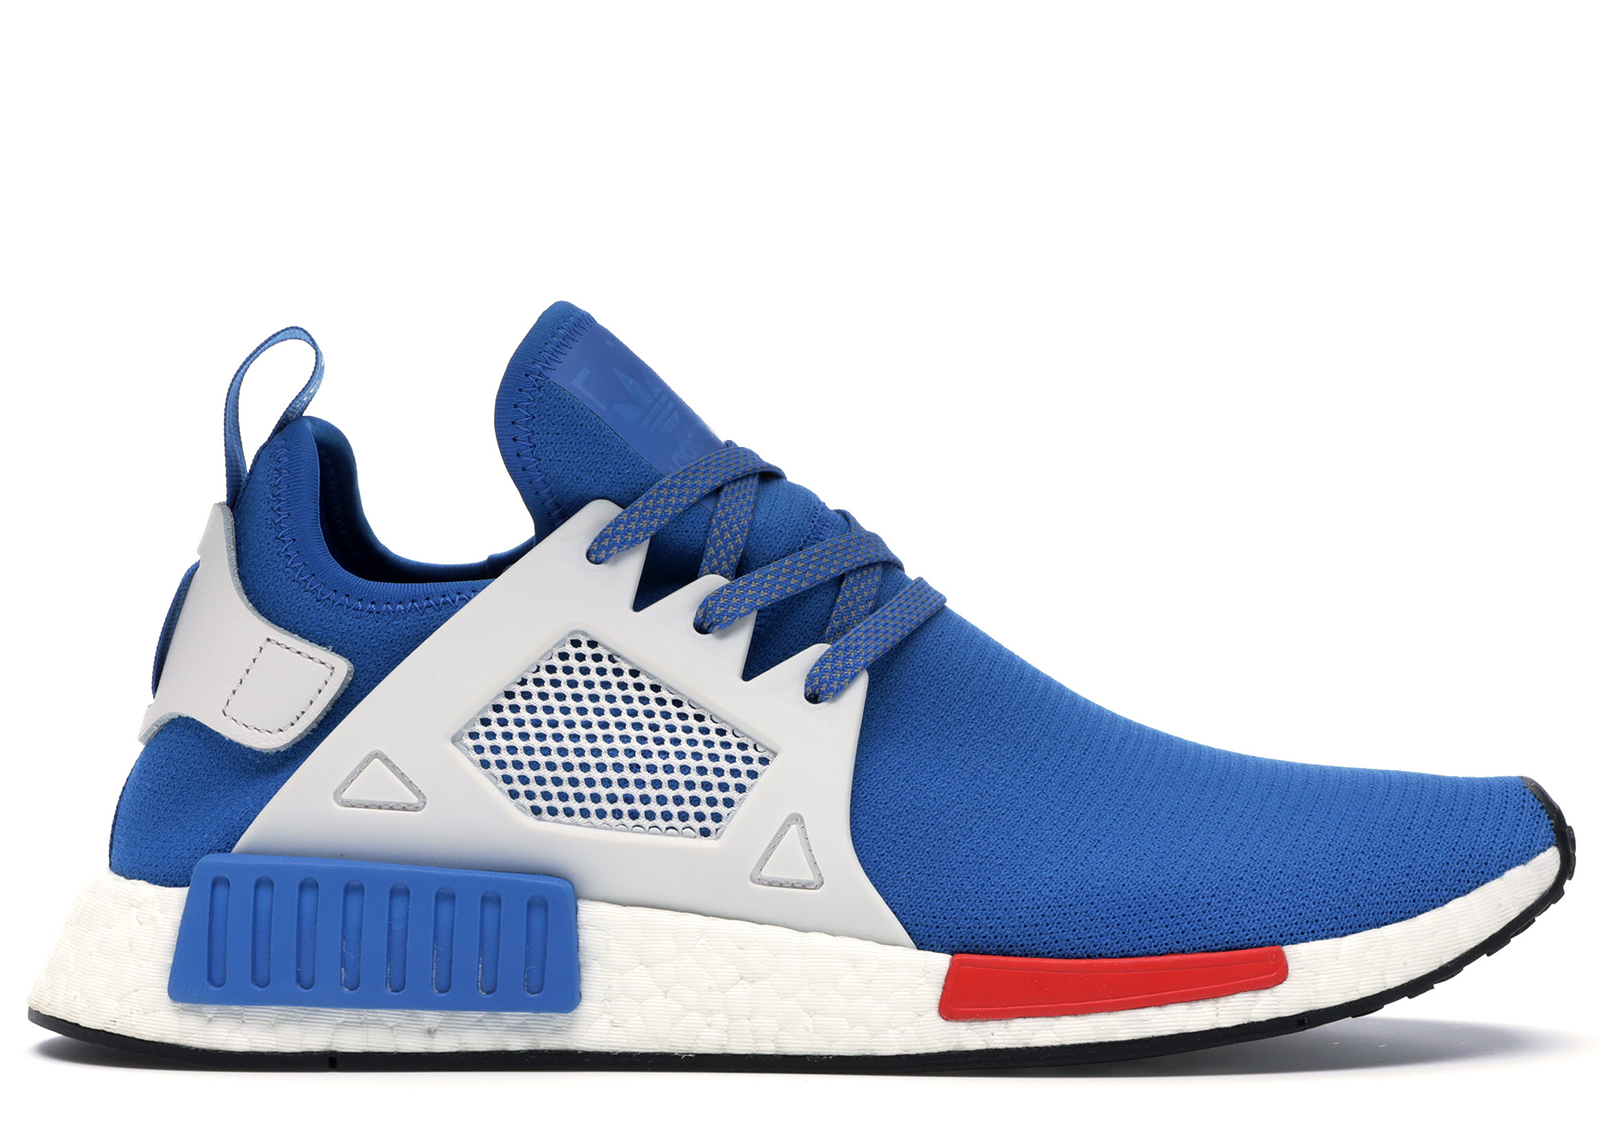 adidas nmd xr1 europe exclusive